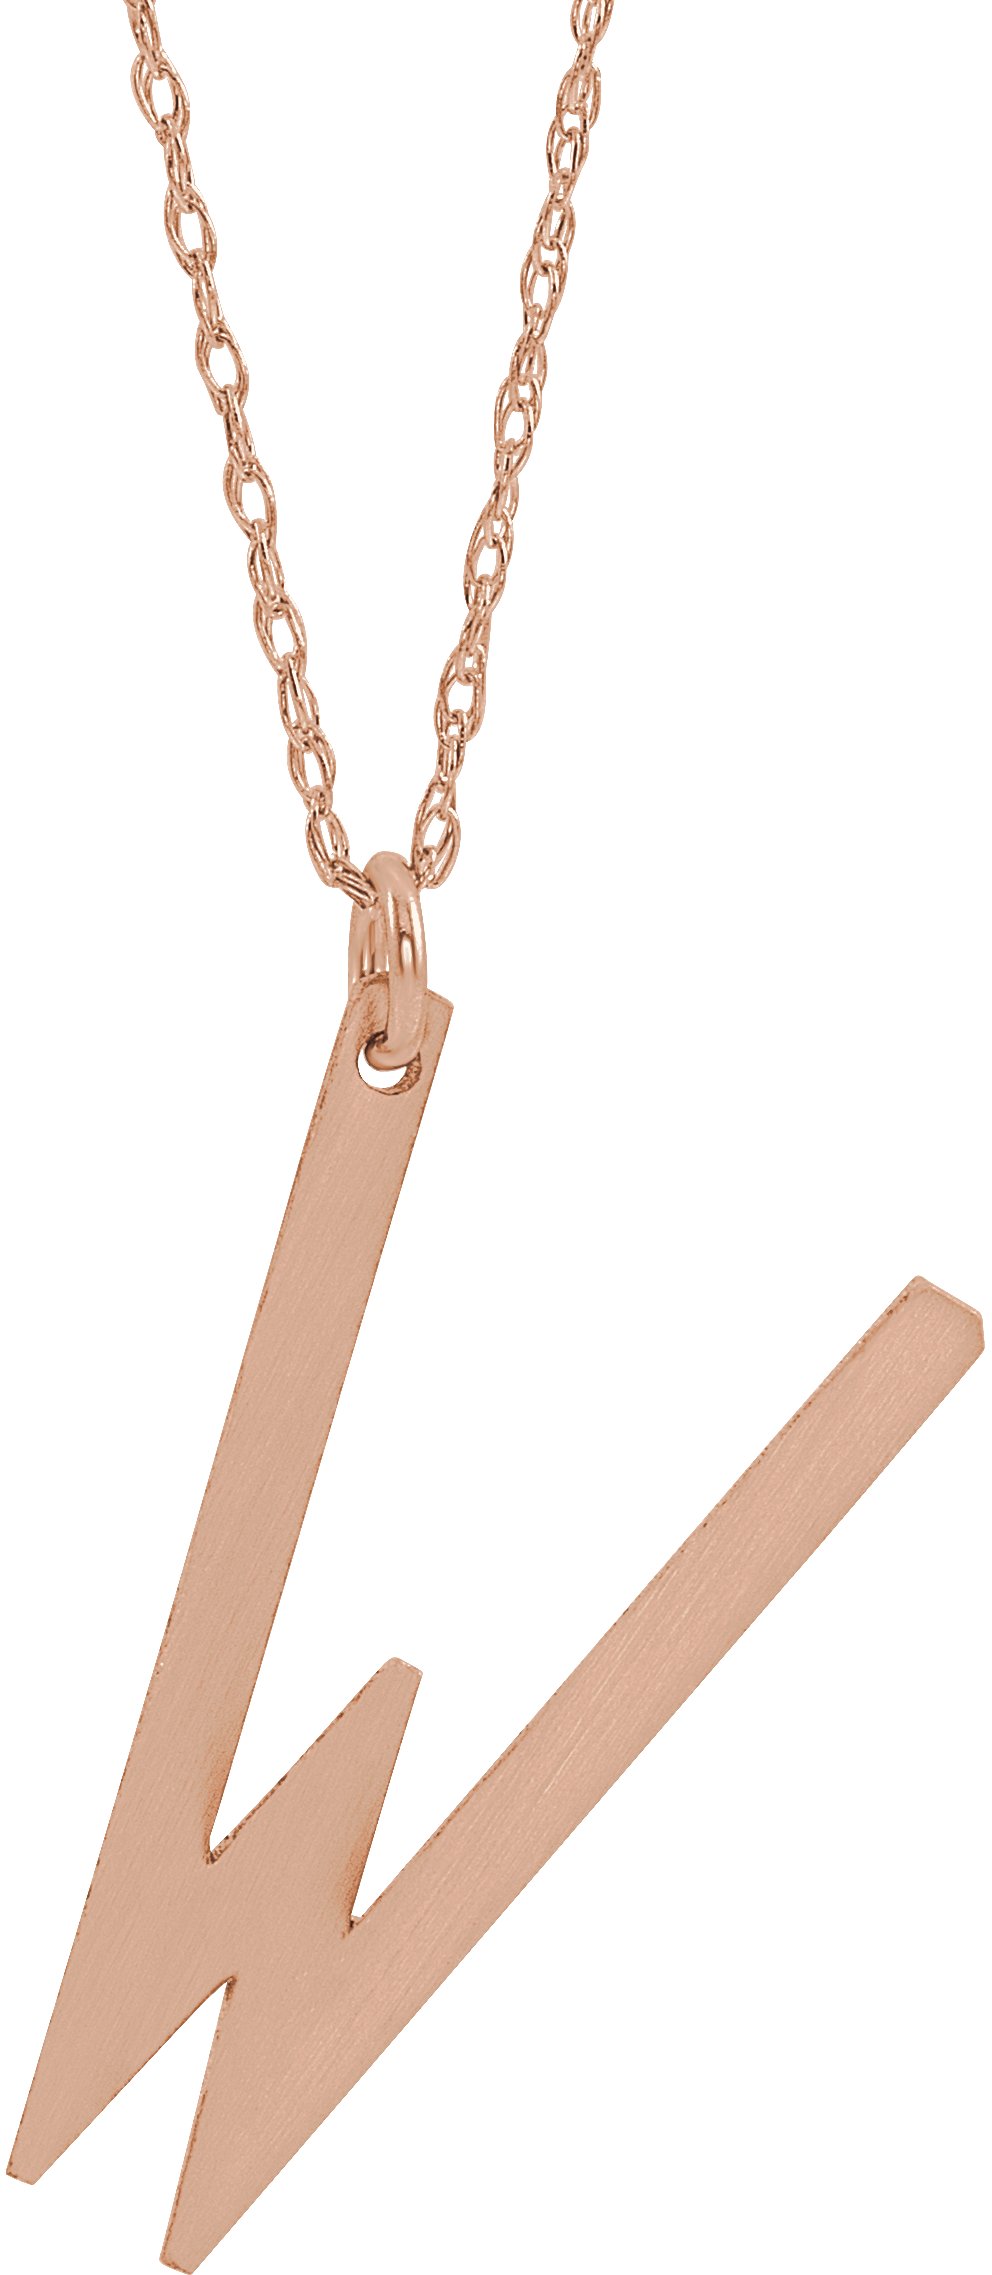 14K Rose Gold-Plated Sterling Silver Block Initial W 16-18" Necklace with Brush Finish